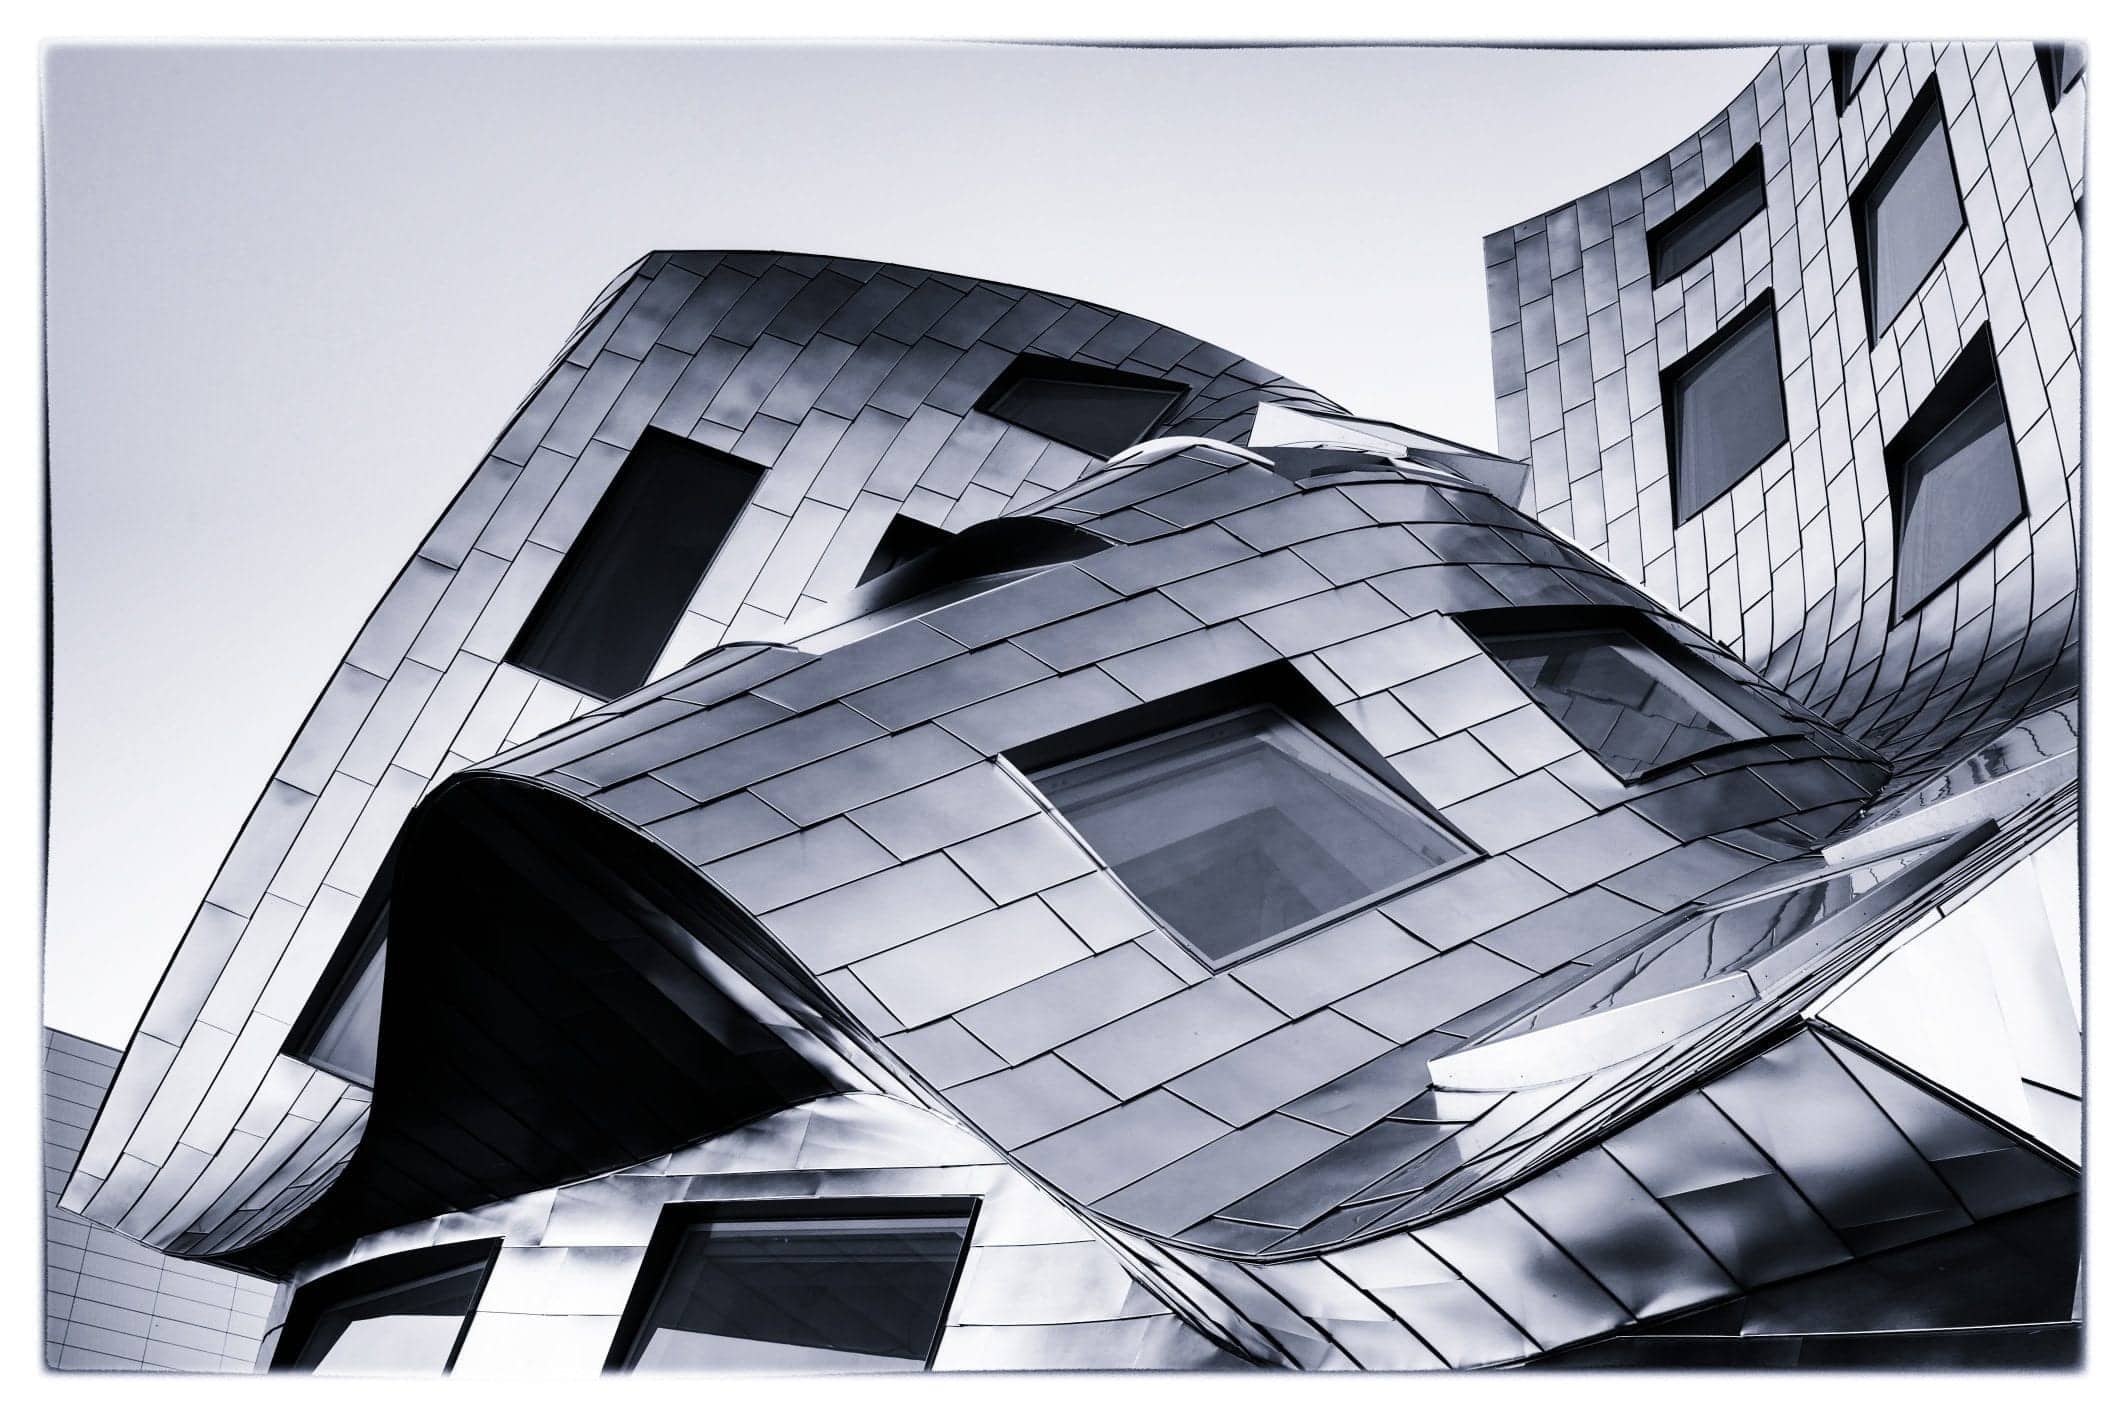 Lou Ruvo Center for Brain Health designed by Frank Gehry.